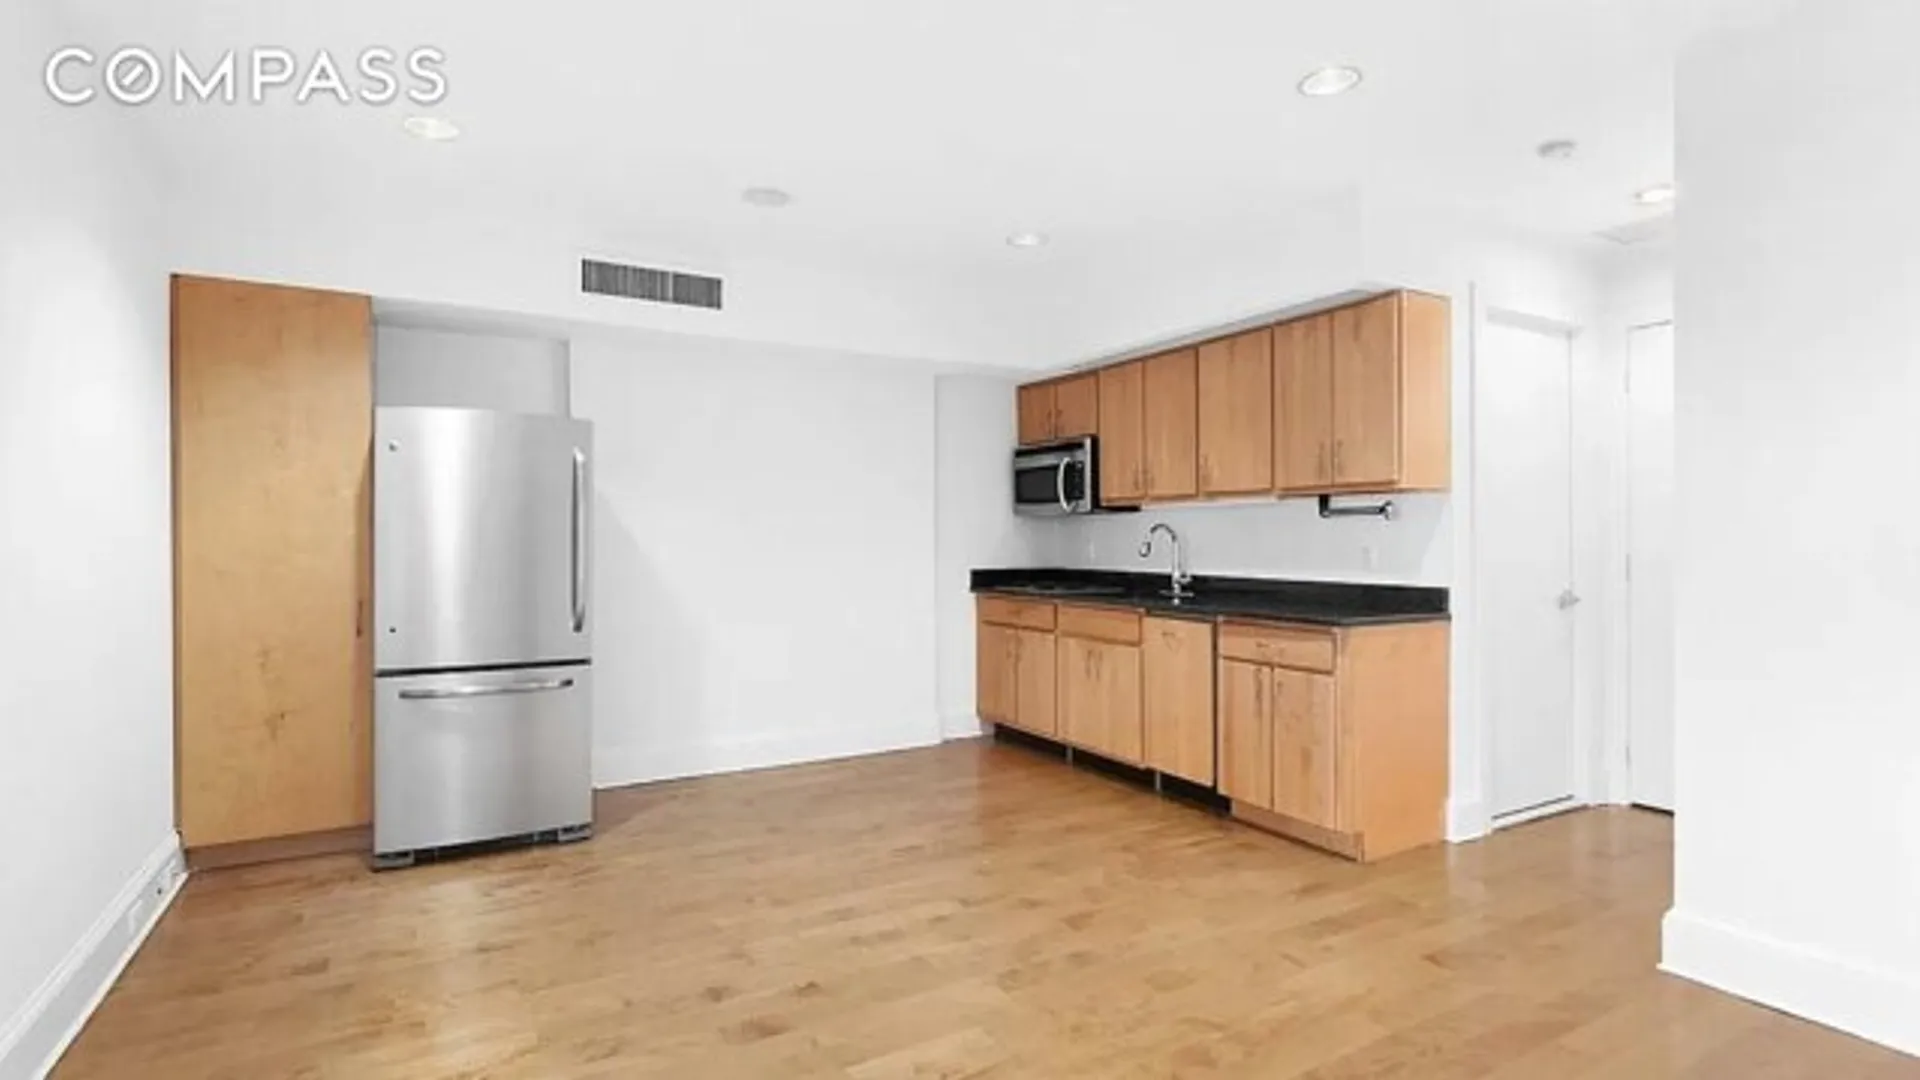 25 West 83rd Street, New York, NY 10024, USA | 1 bed house for rent